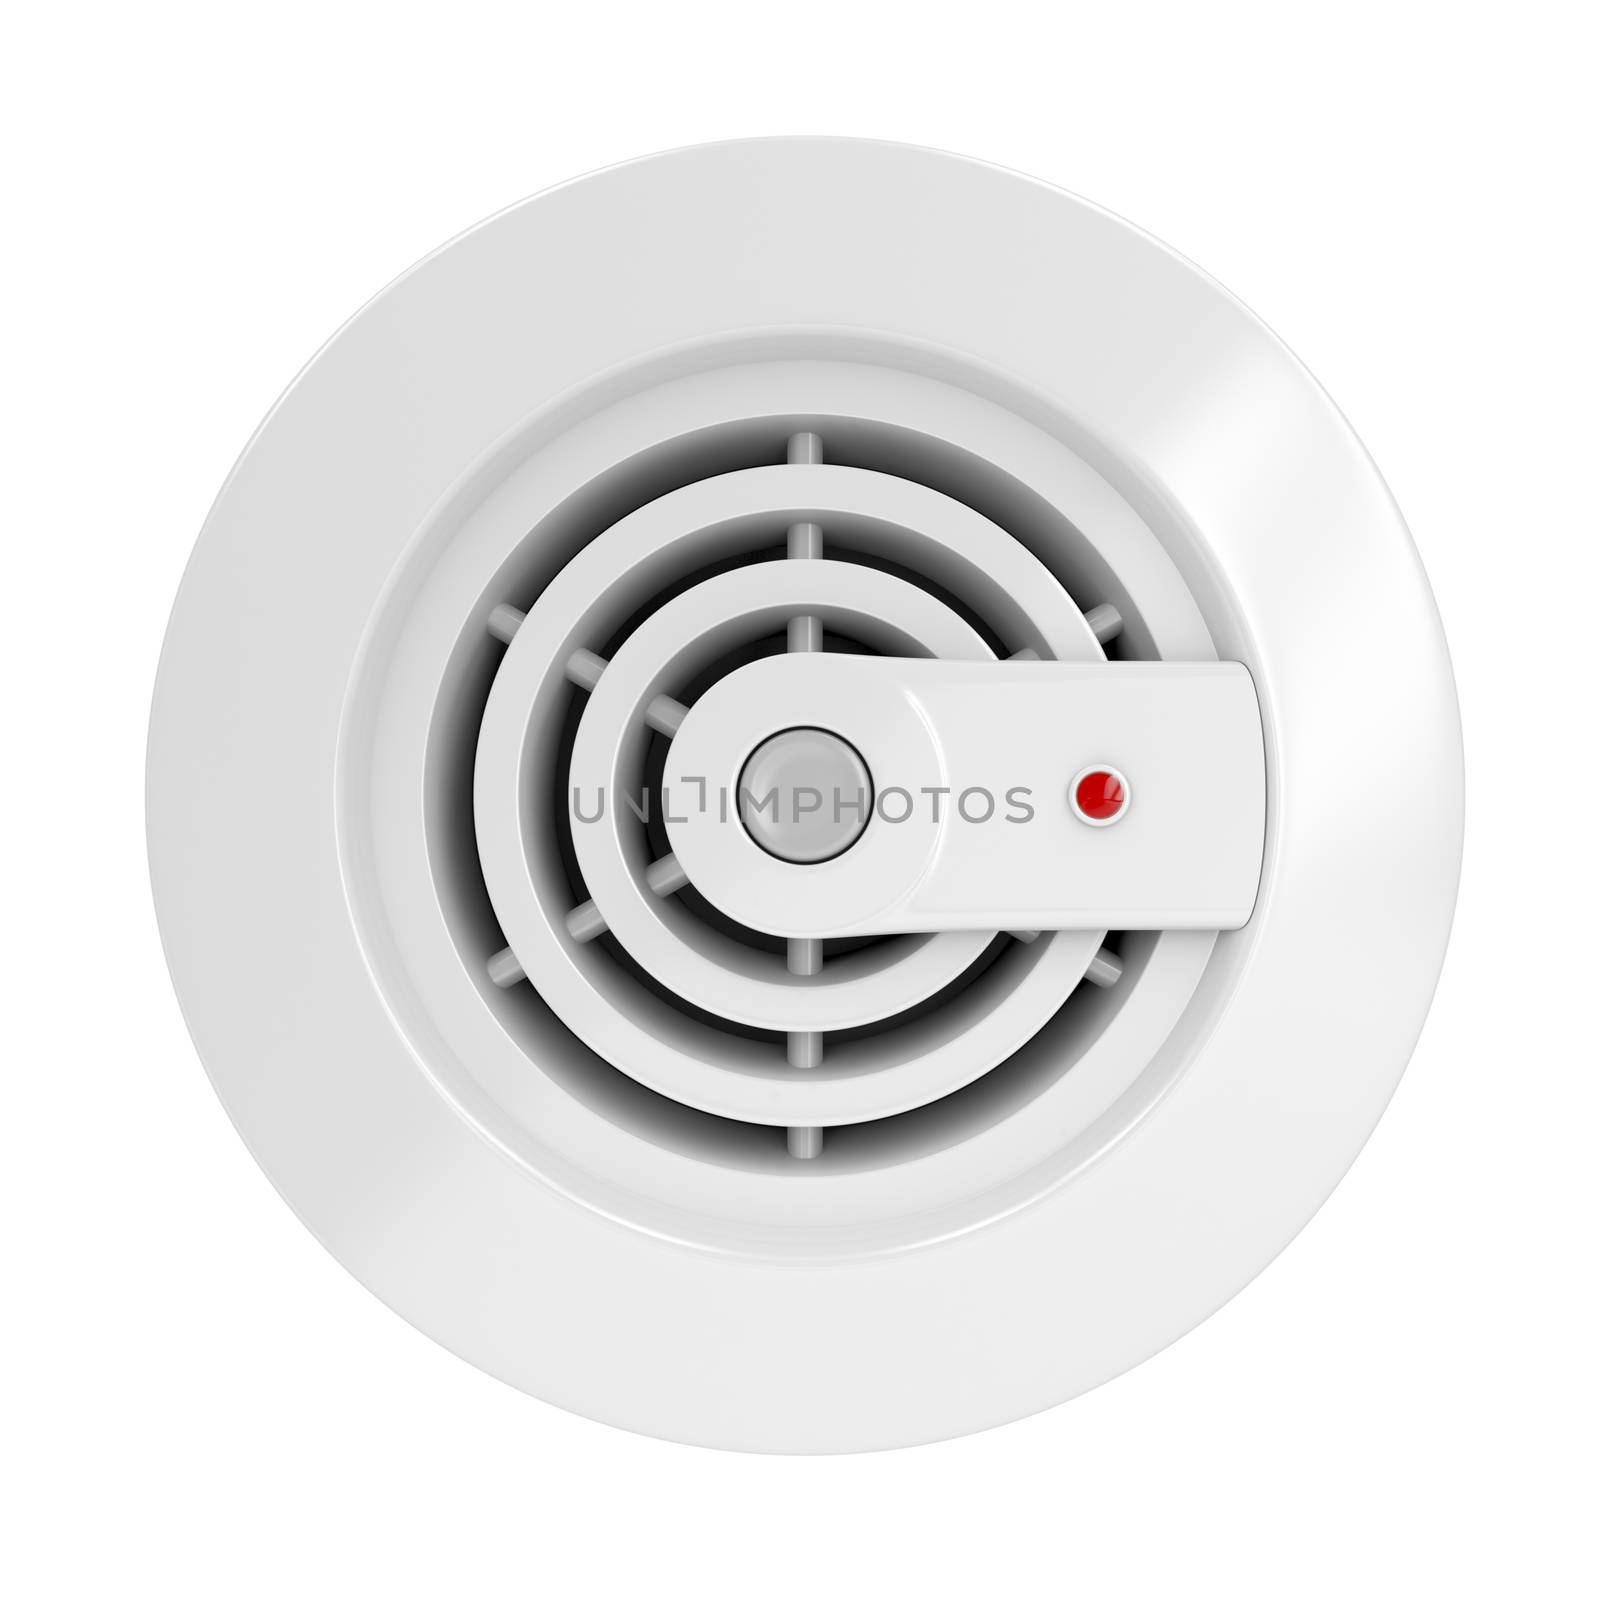 Smoke and fire detector isolated on white